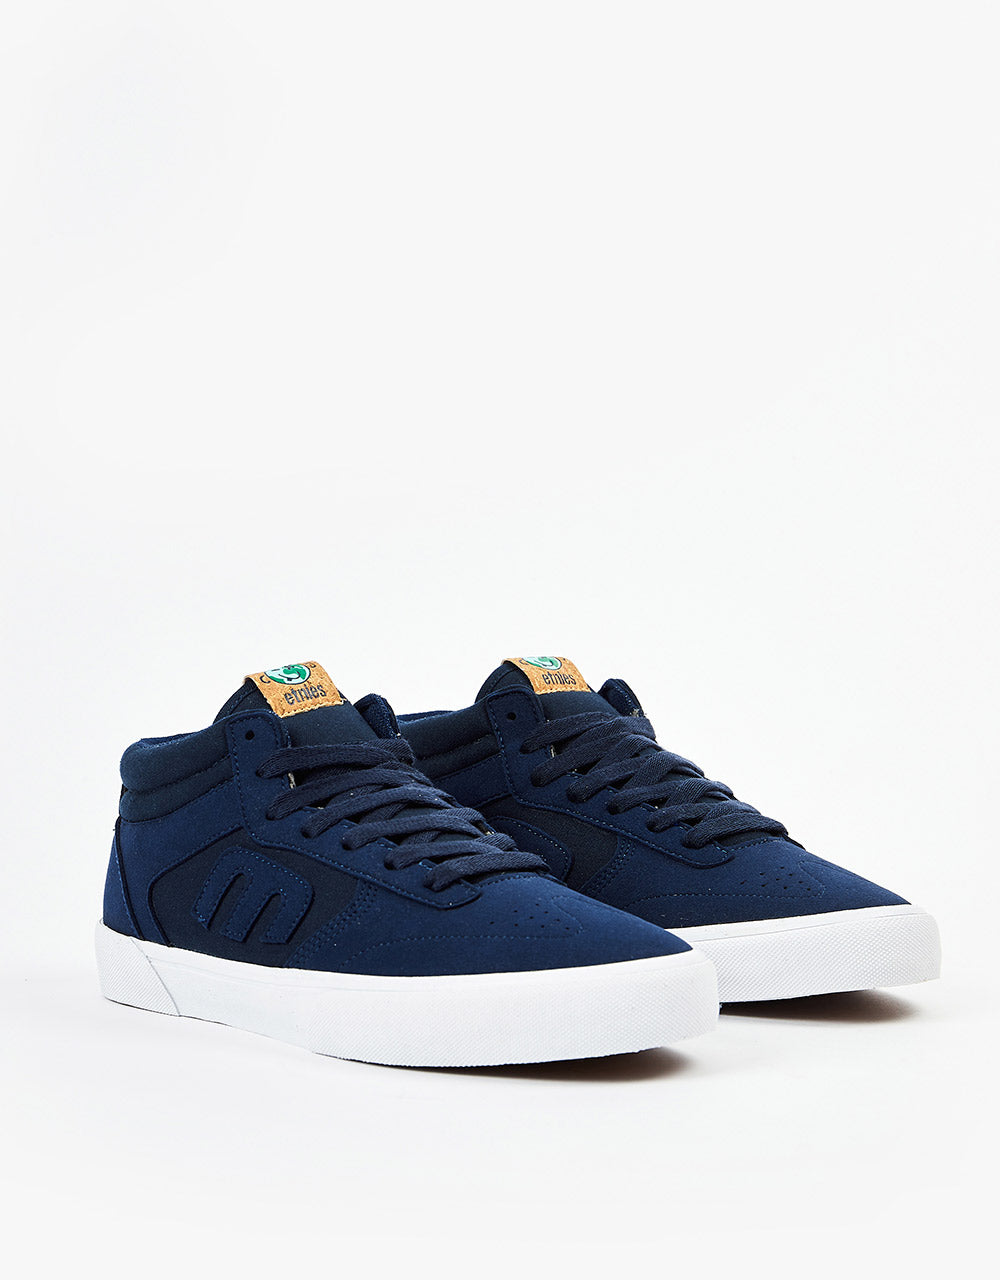 Etnies x Earth Day Windrow Vulc Mid Skate Shoes - Blue